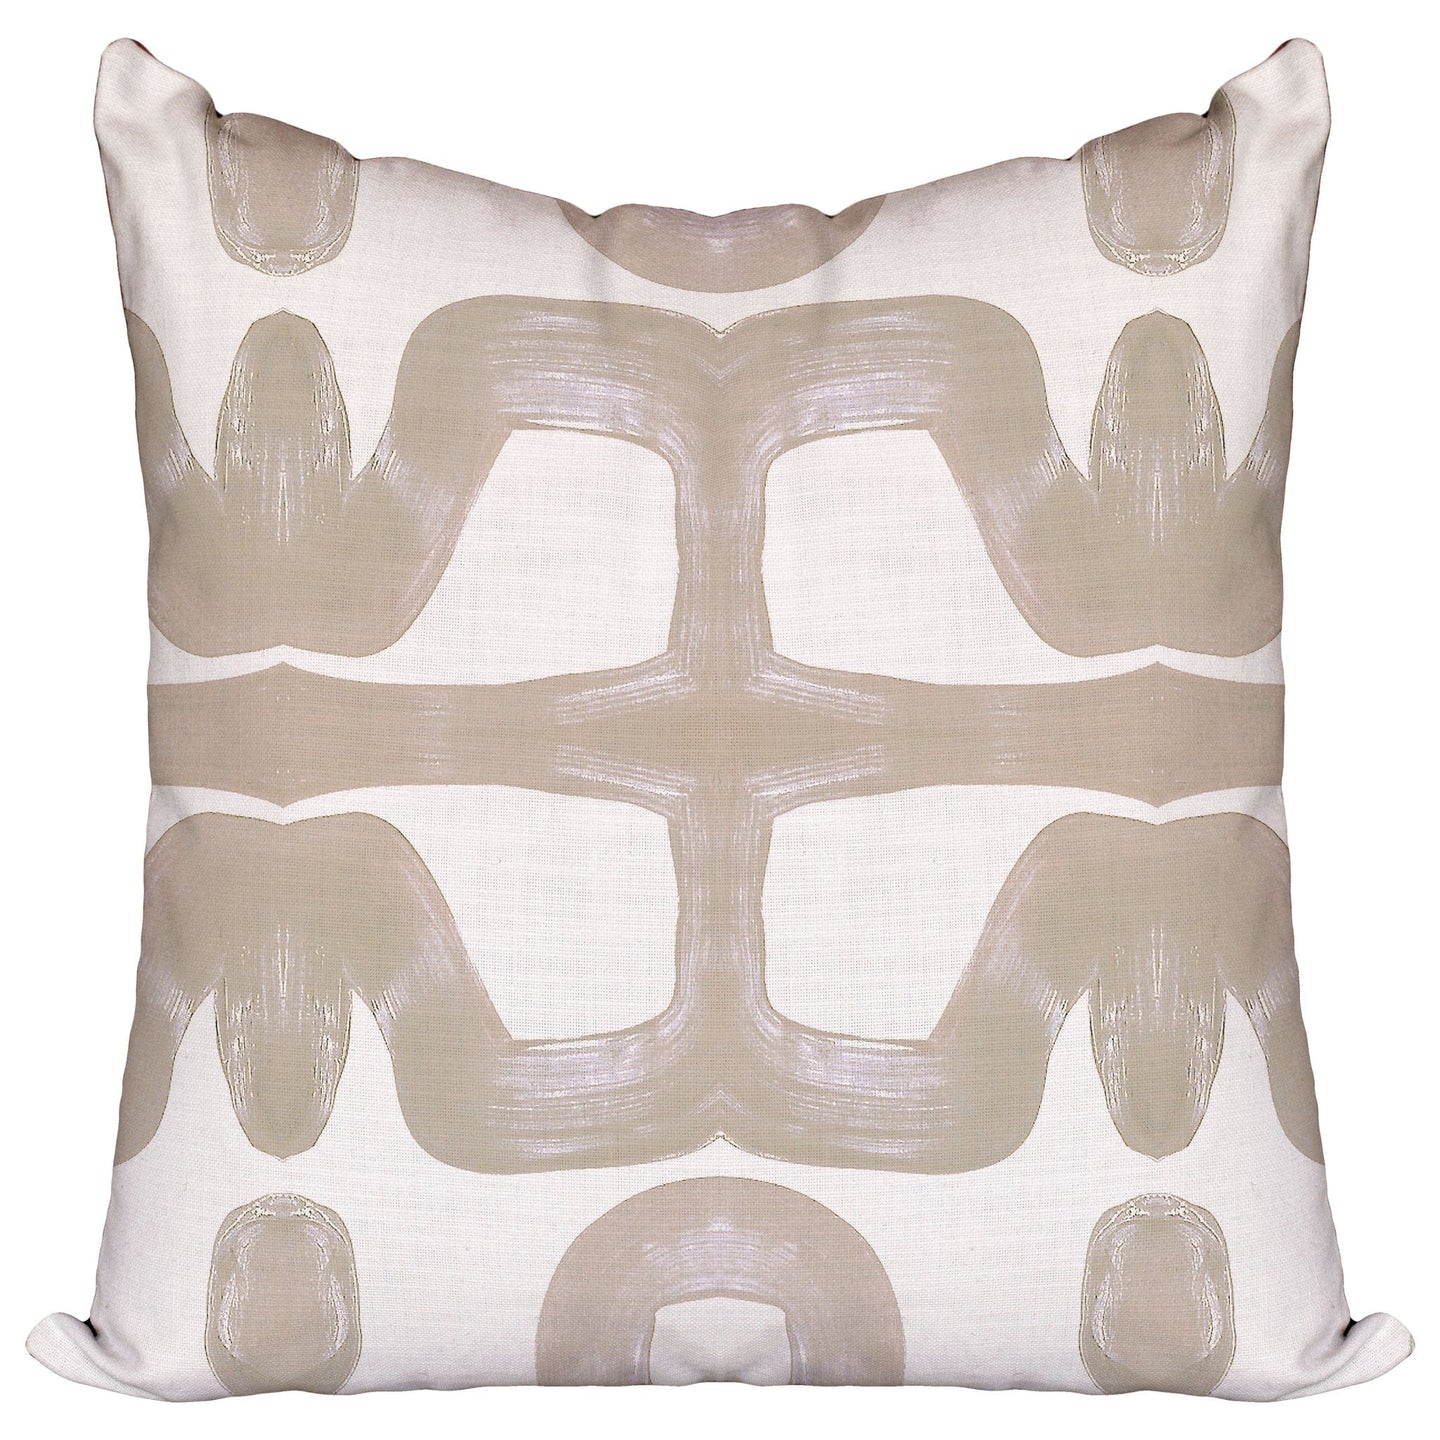 Windy O'Connor Candied Icing Pillow- Frappe Pillows